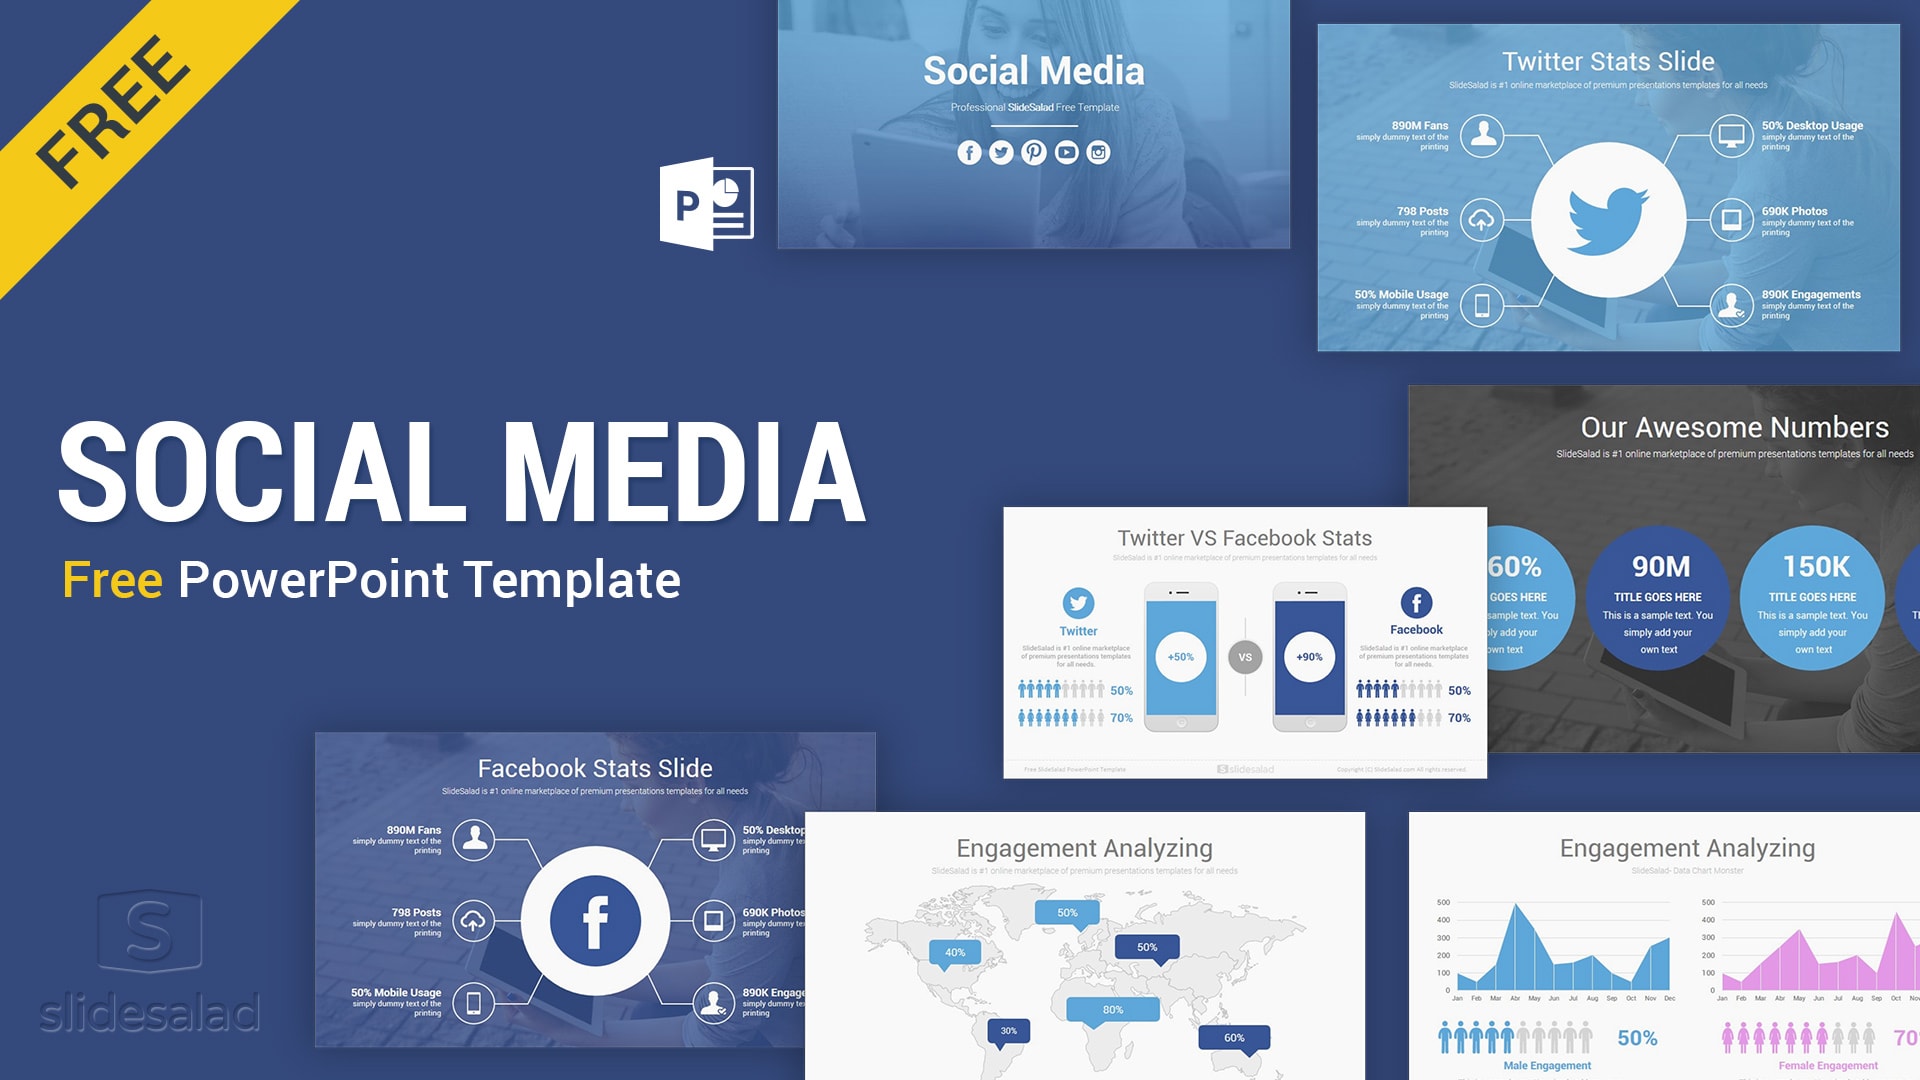 Social Media Free PowerPoint Template PPT Slides